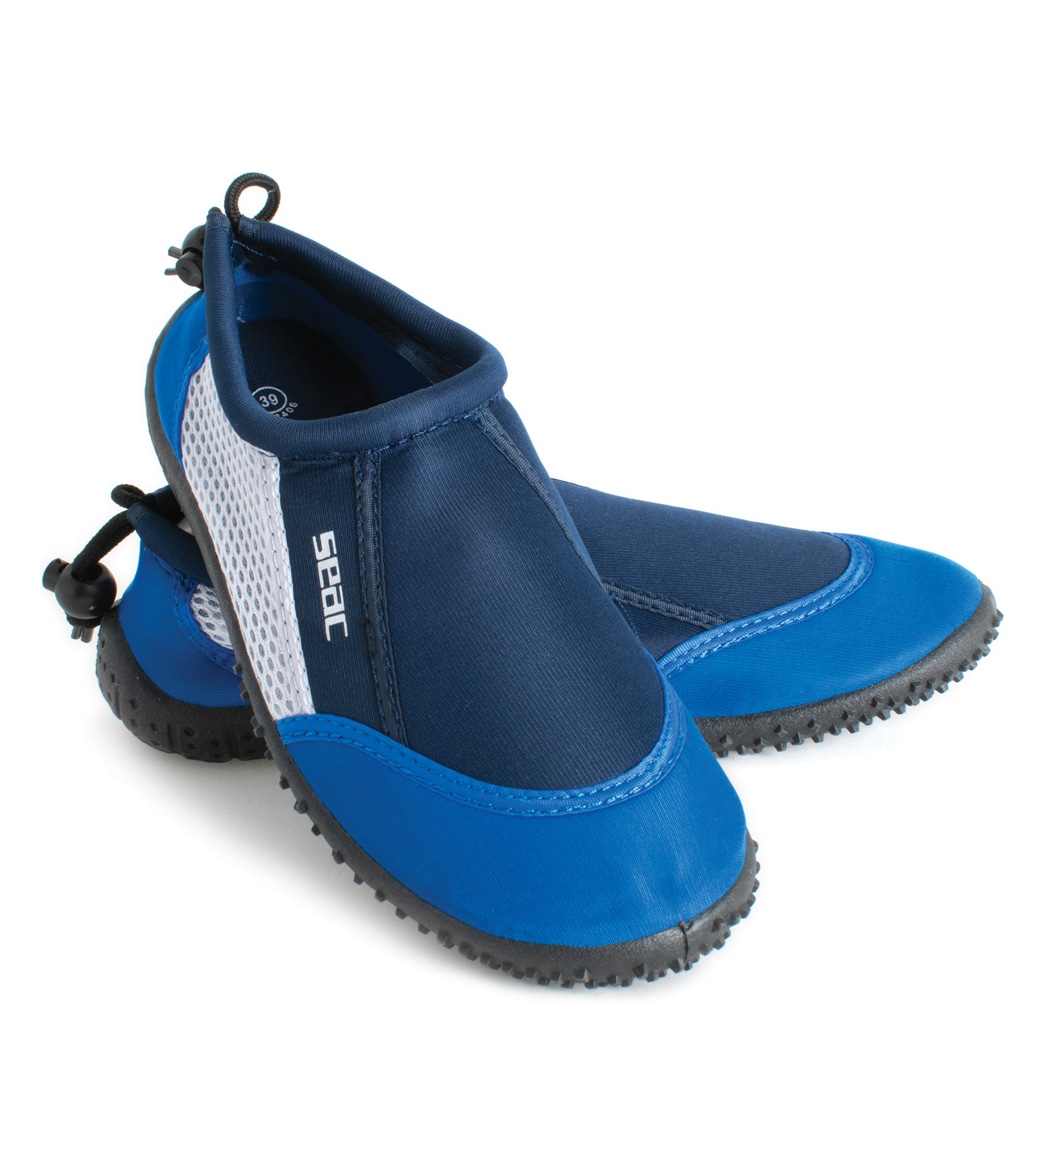 Seac Usa Reef Water Shoes - Blue 10 - Swimoutlet.com